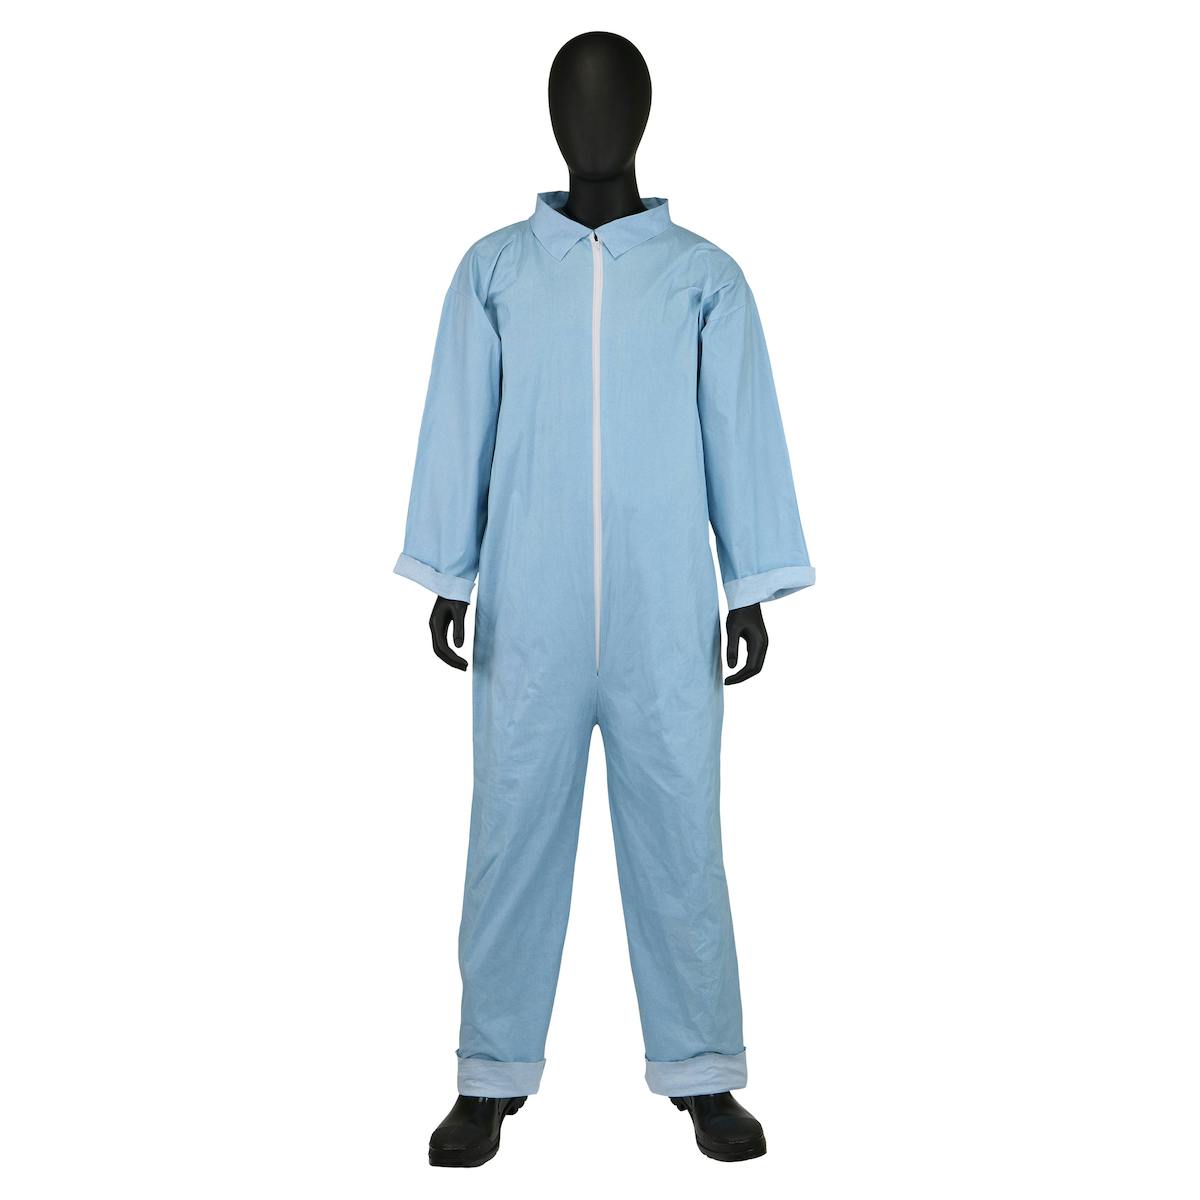 Posi-Wear Flame Resistant Basic Coverall, 80 gsm, Blue (3100)